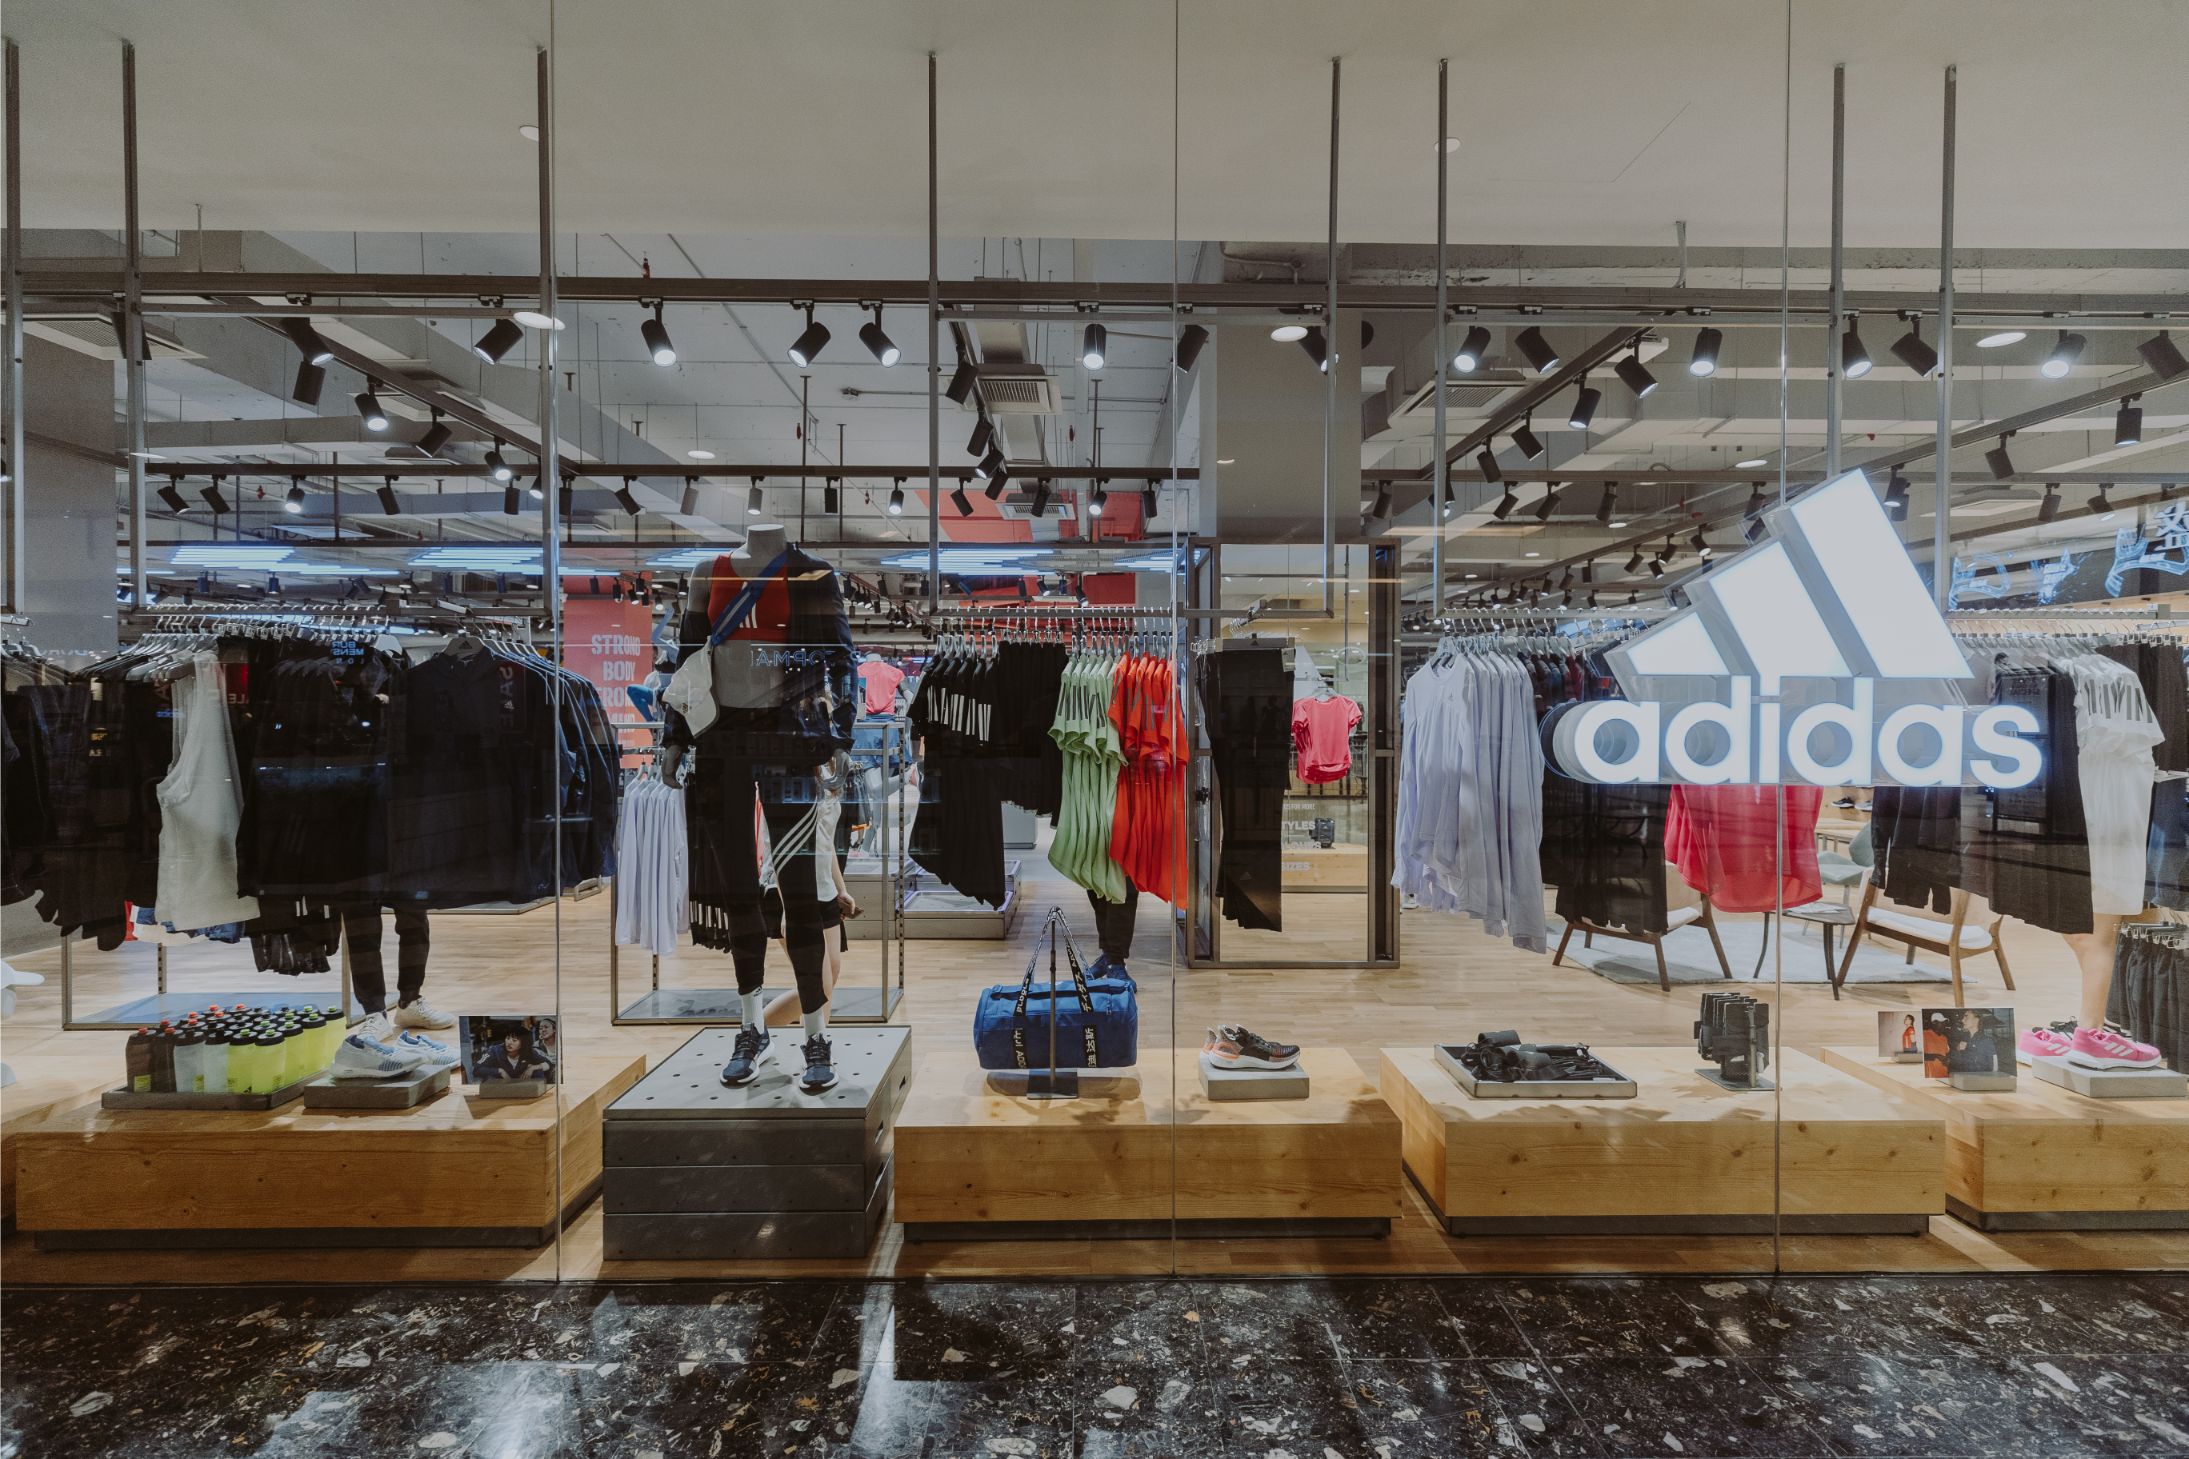 adidas Has Just Their Largest Flagship Store In Malaysia - MASSES